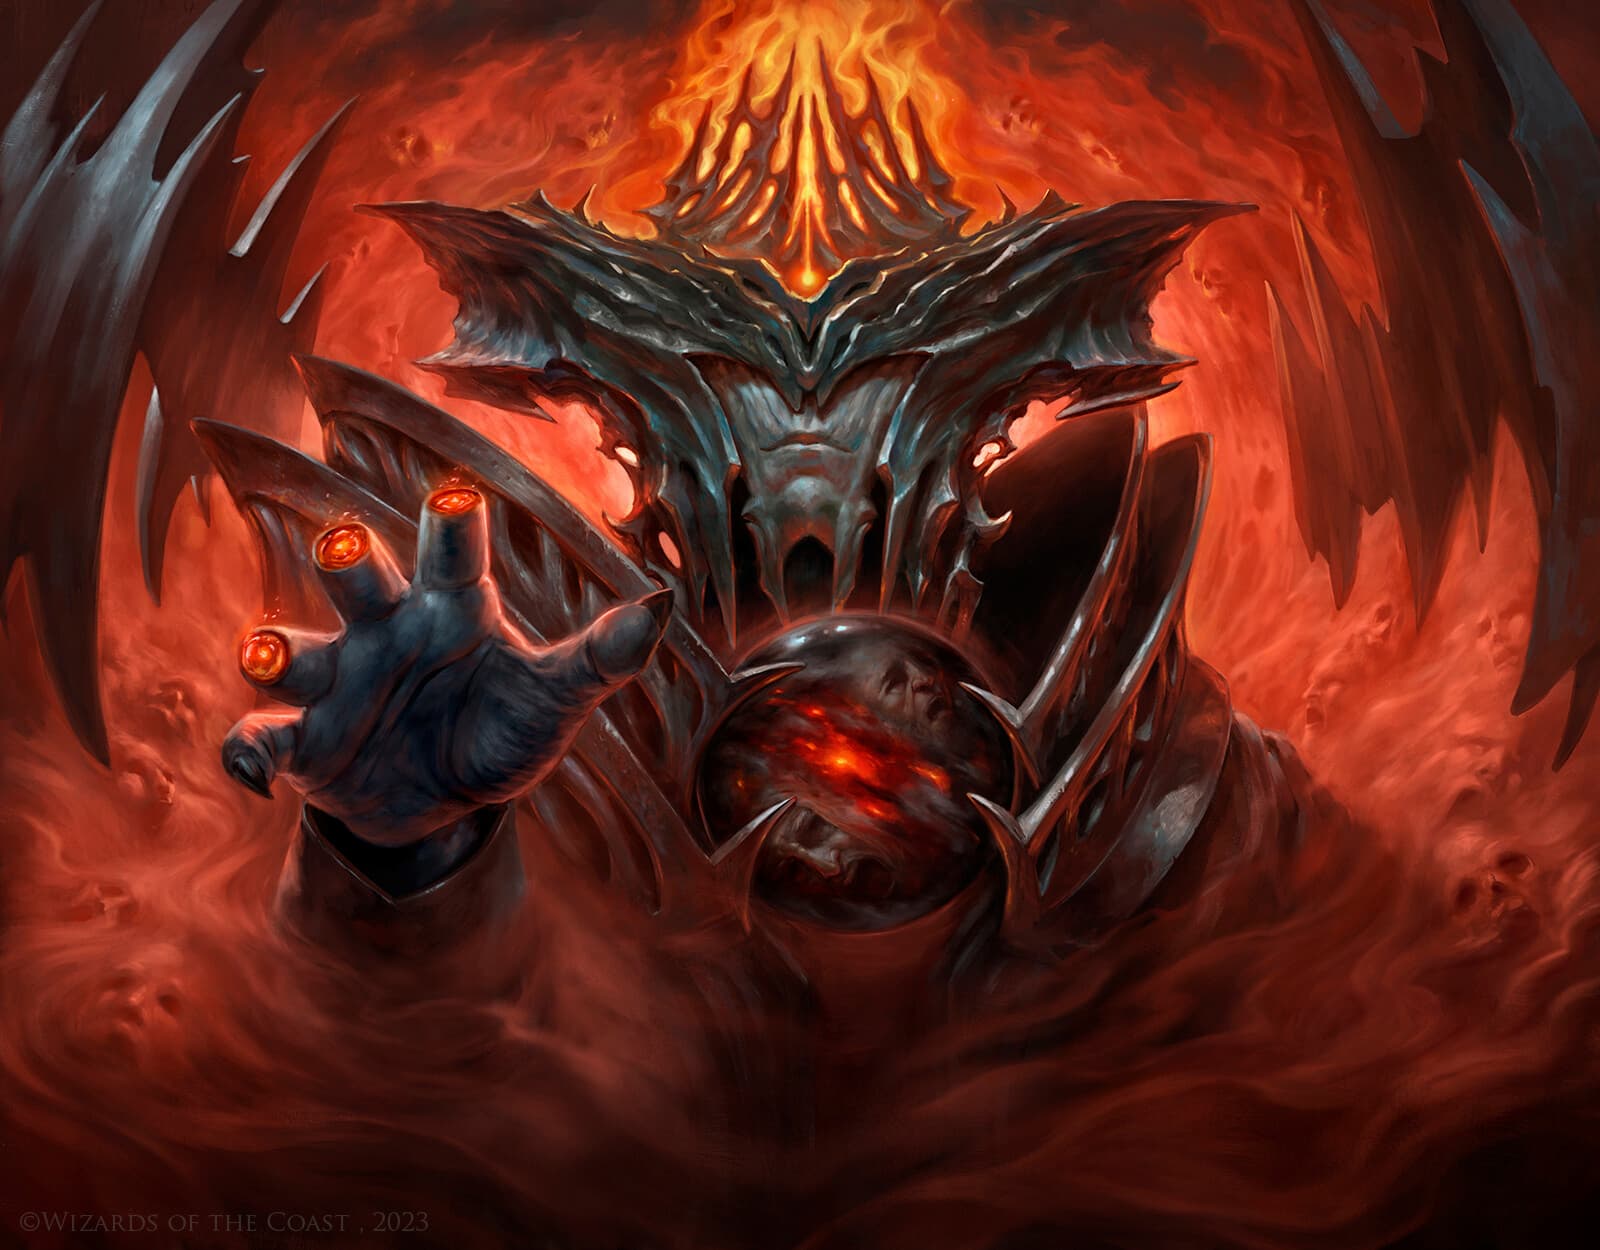 Image of Sauron, the Lidless Eye by Yigit Koroglu in MTG Lord of the Rings set